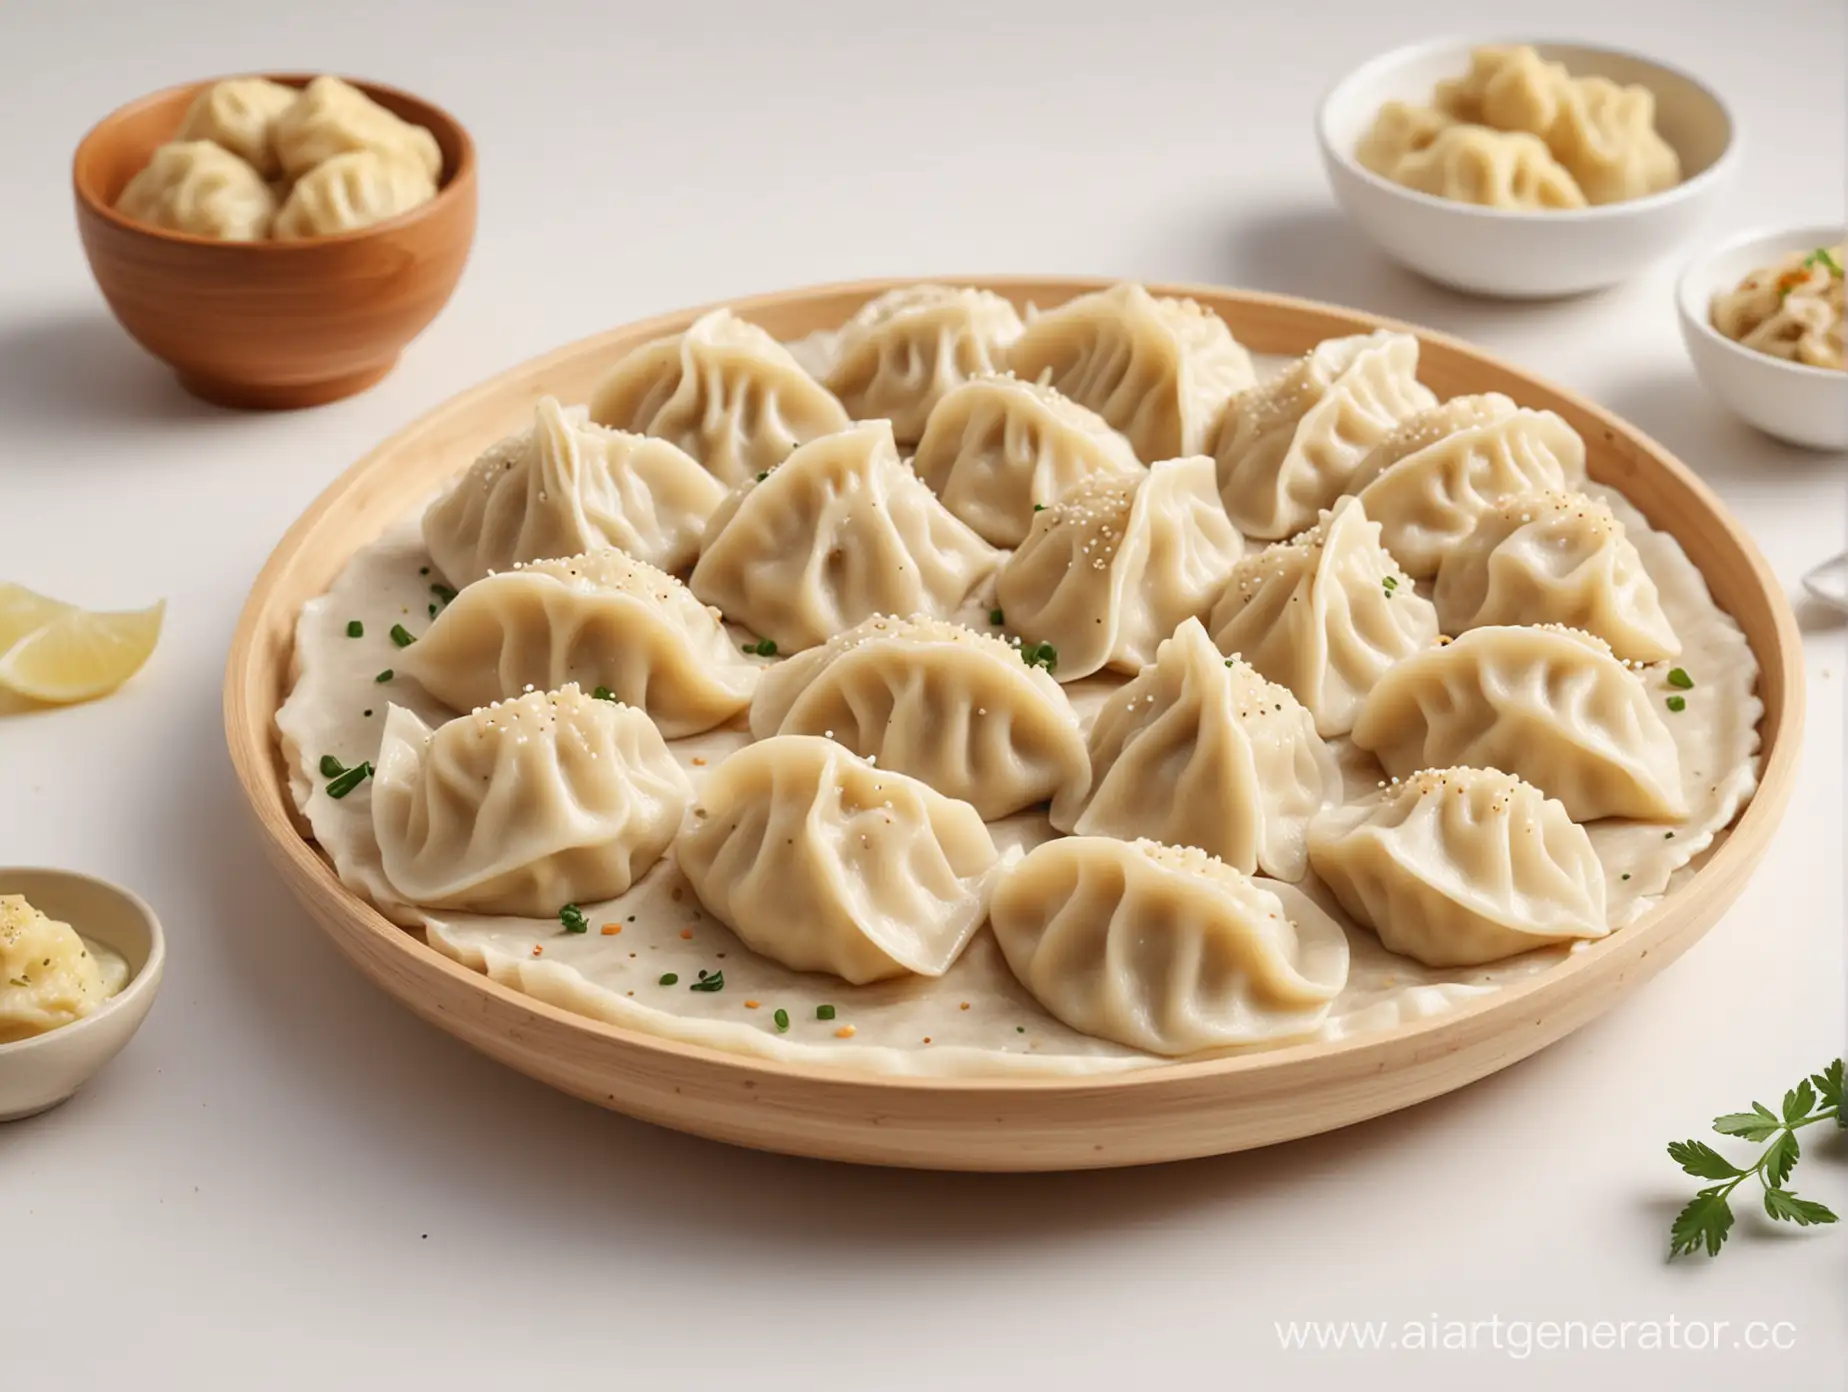 Delicious-Dumplings-on-White-Aesthetic-Food-Photography